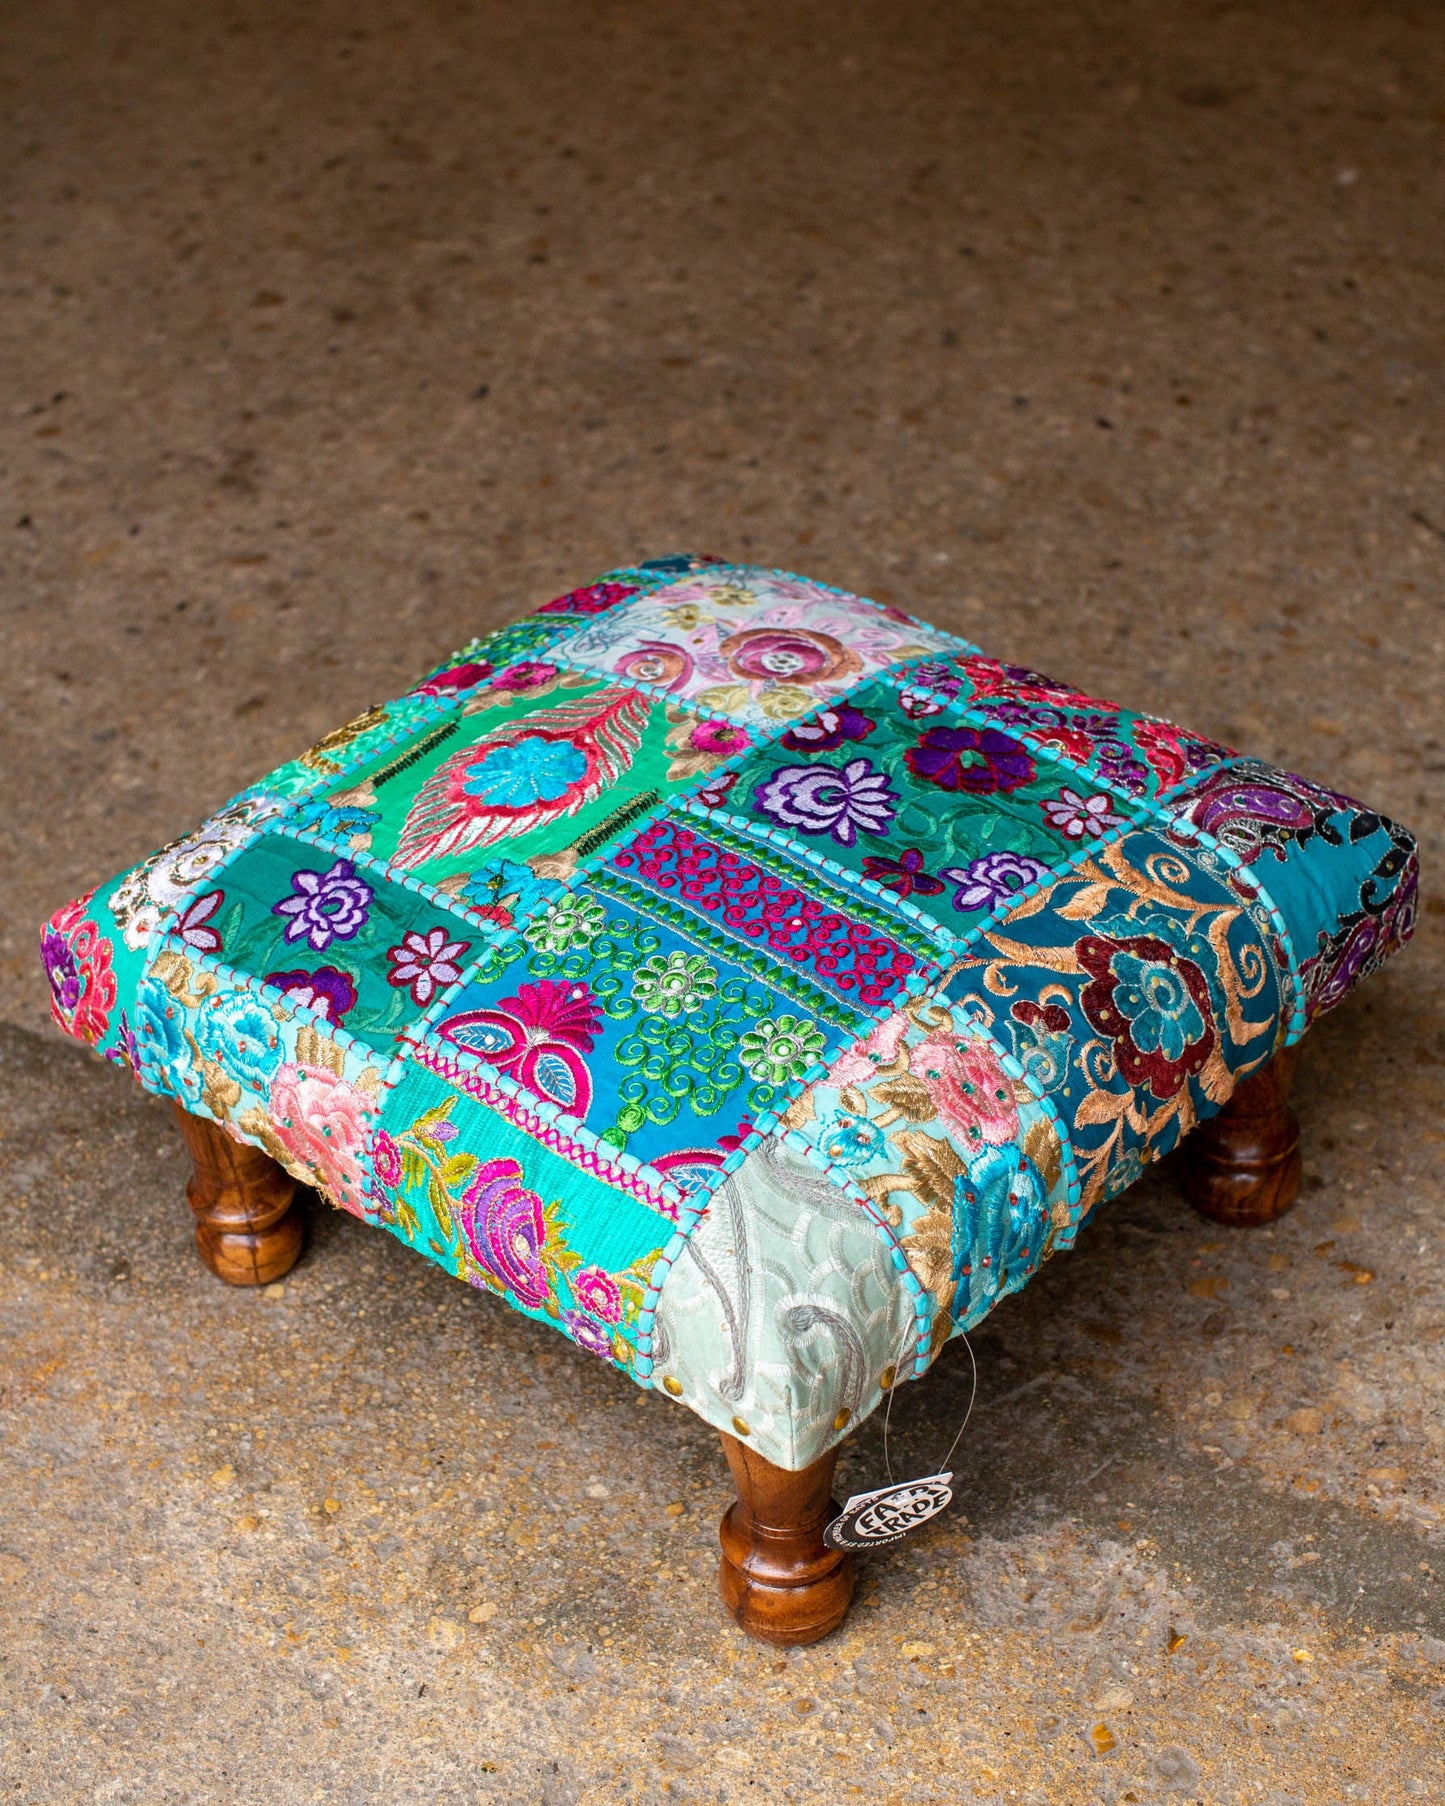 Upcycled Patchwork Foot stool